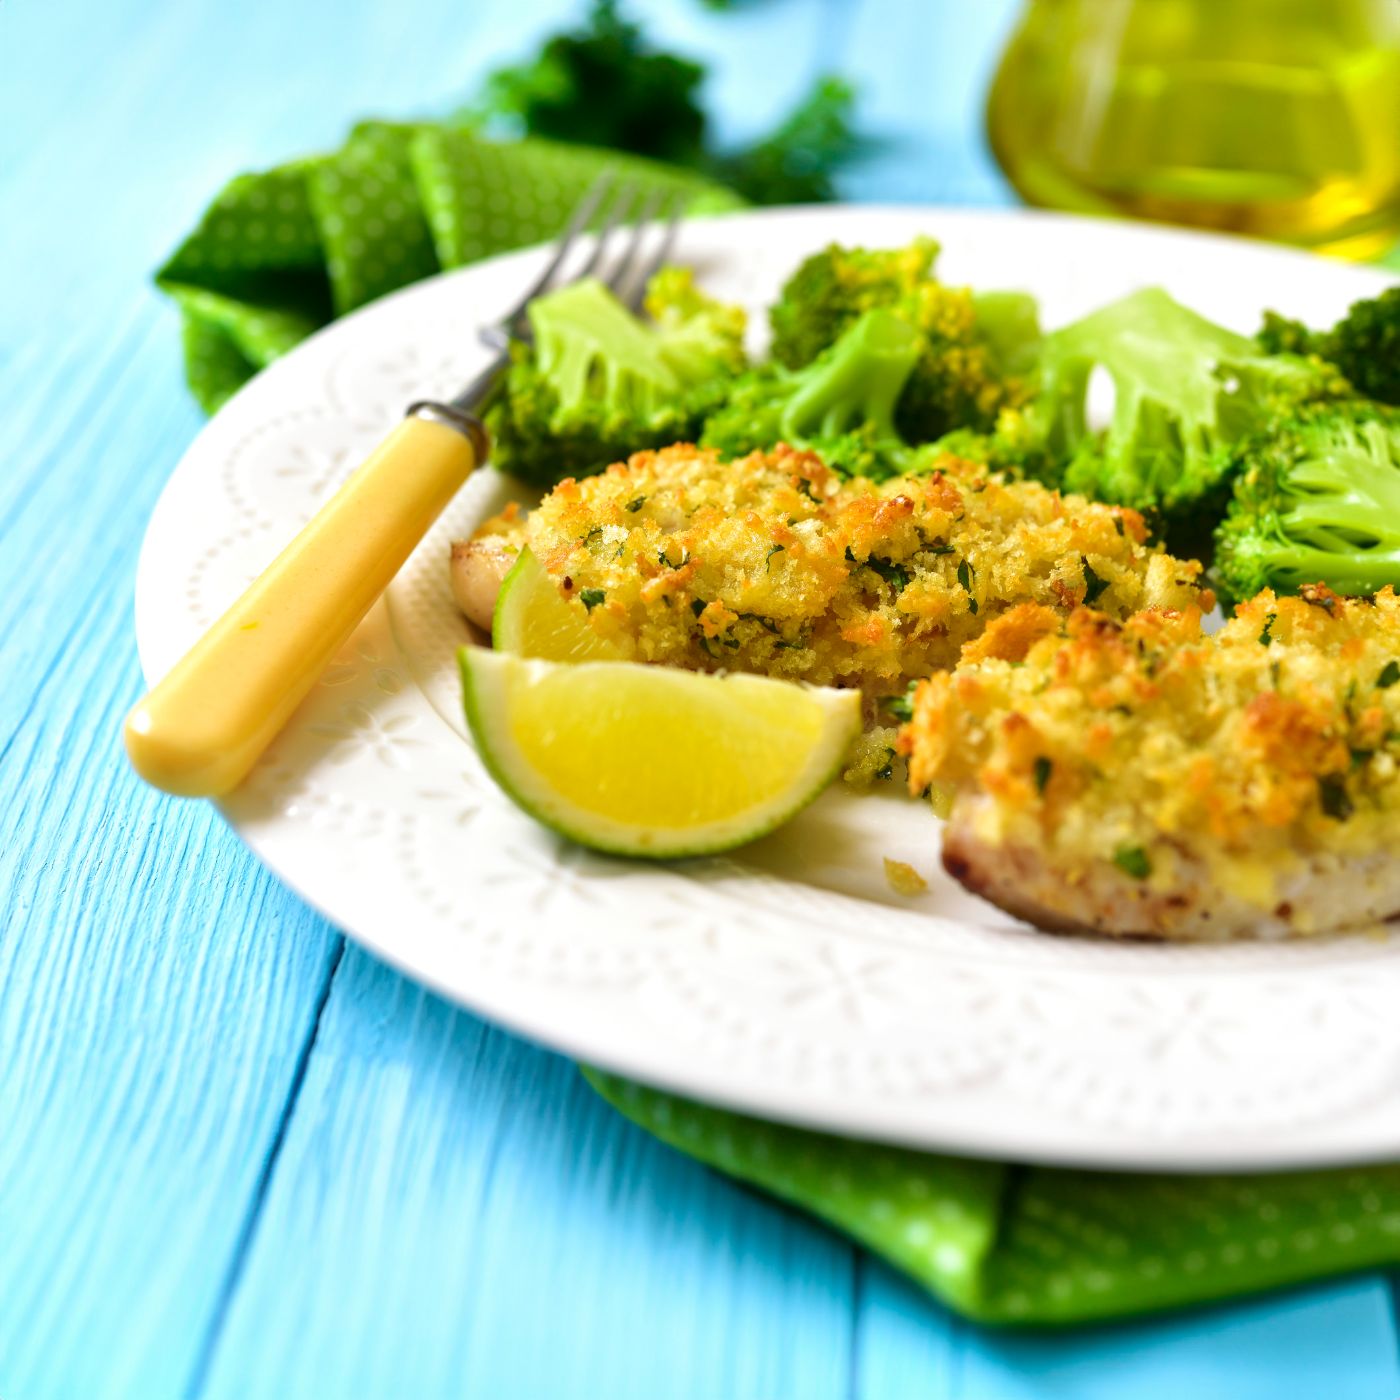 Cod-baked-with-garlic-bread-crumbs.-514419960_2123x1417 square.jpeg